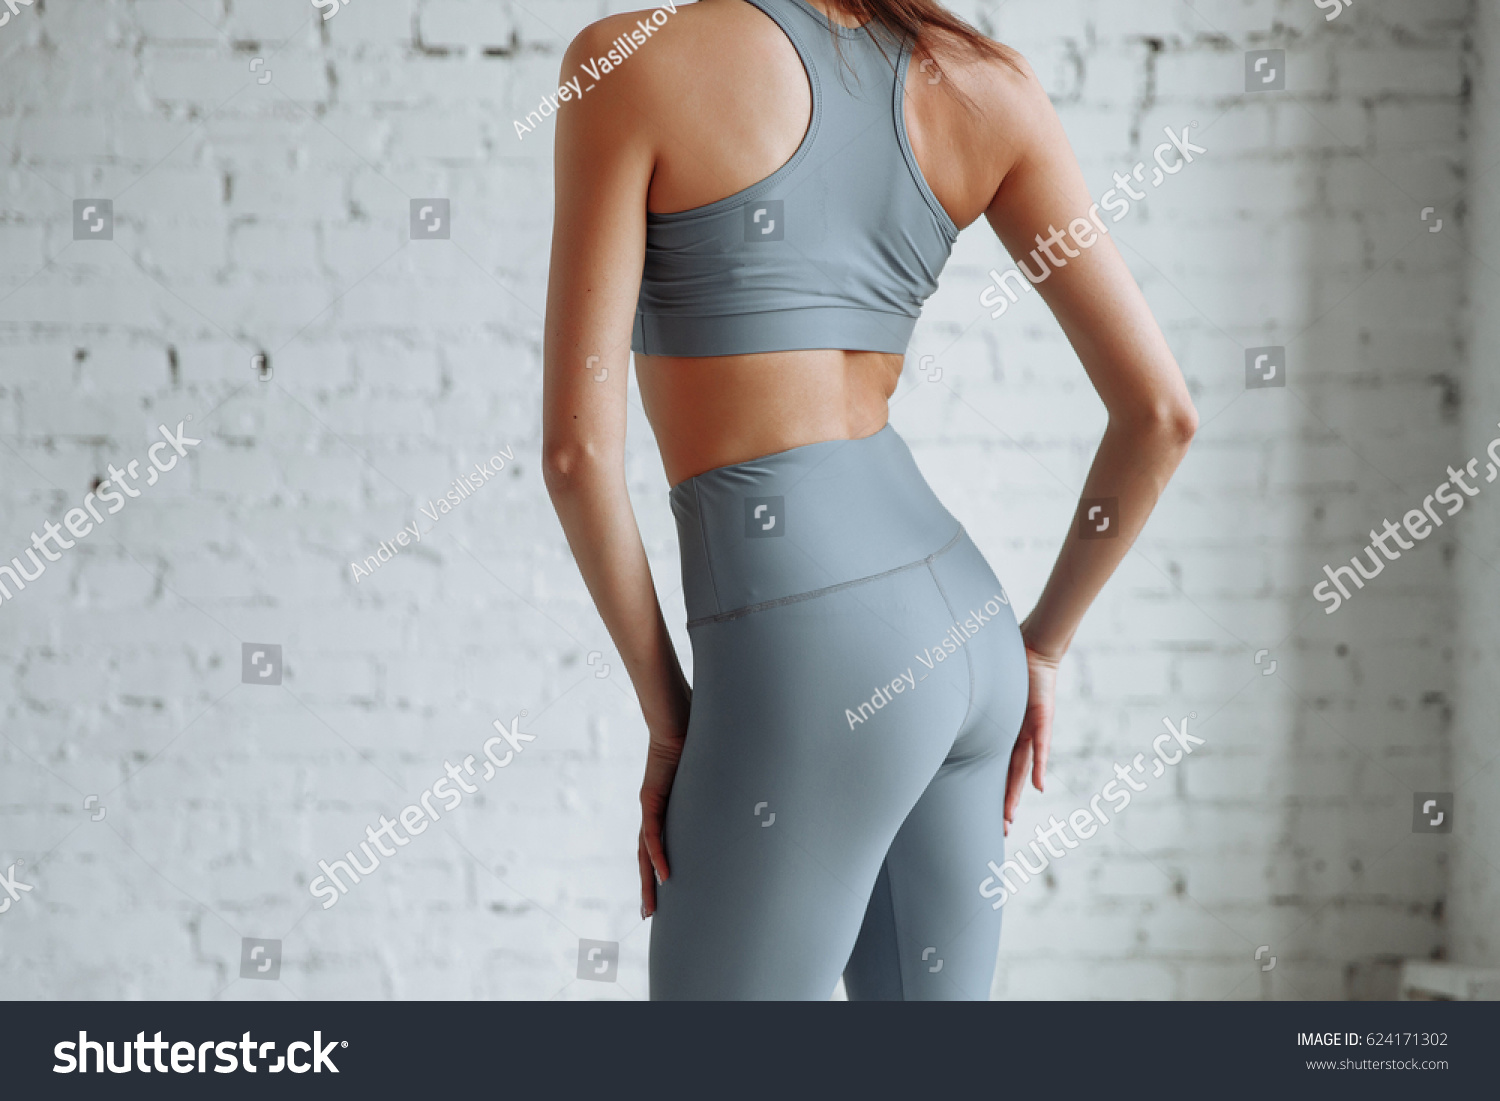 Girls In Really Tight Clothes green ky